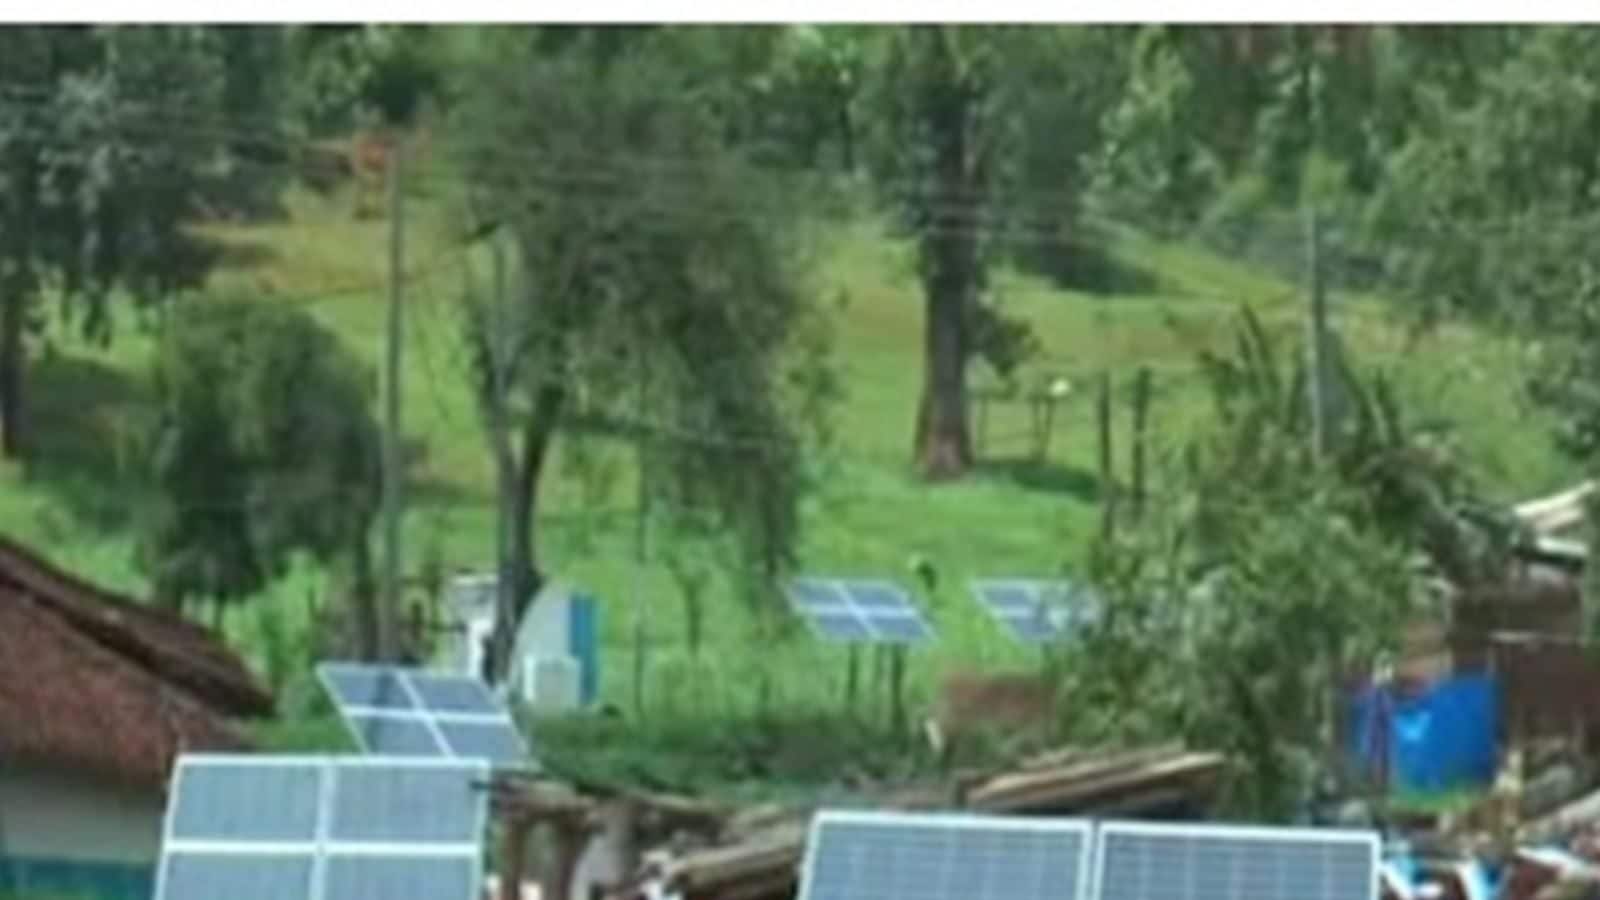 The residents of this MP village don't need wood or LPG to cook as solar energy changes lives - News18